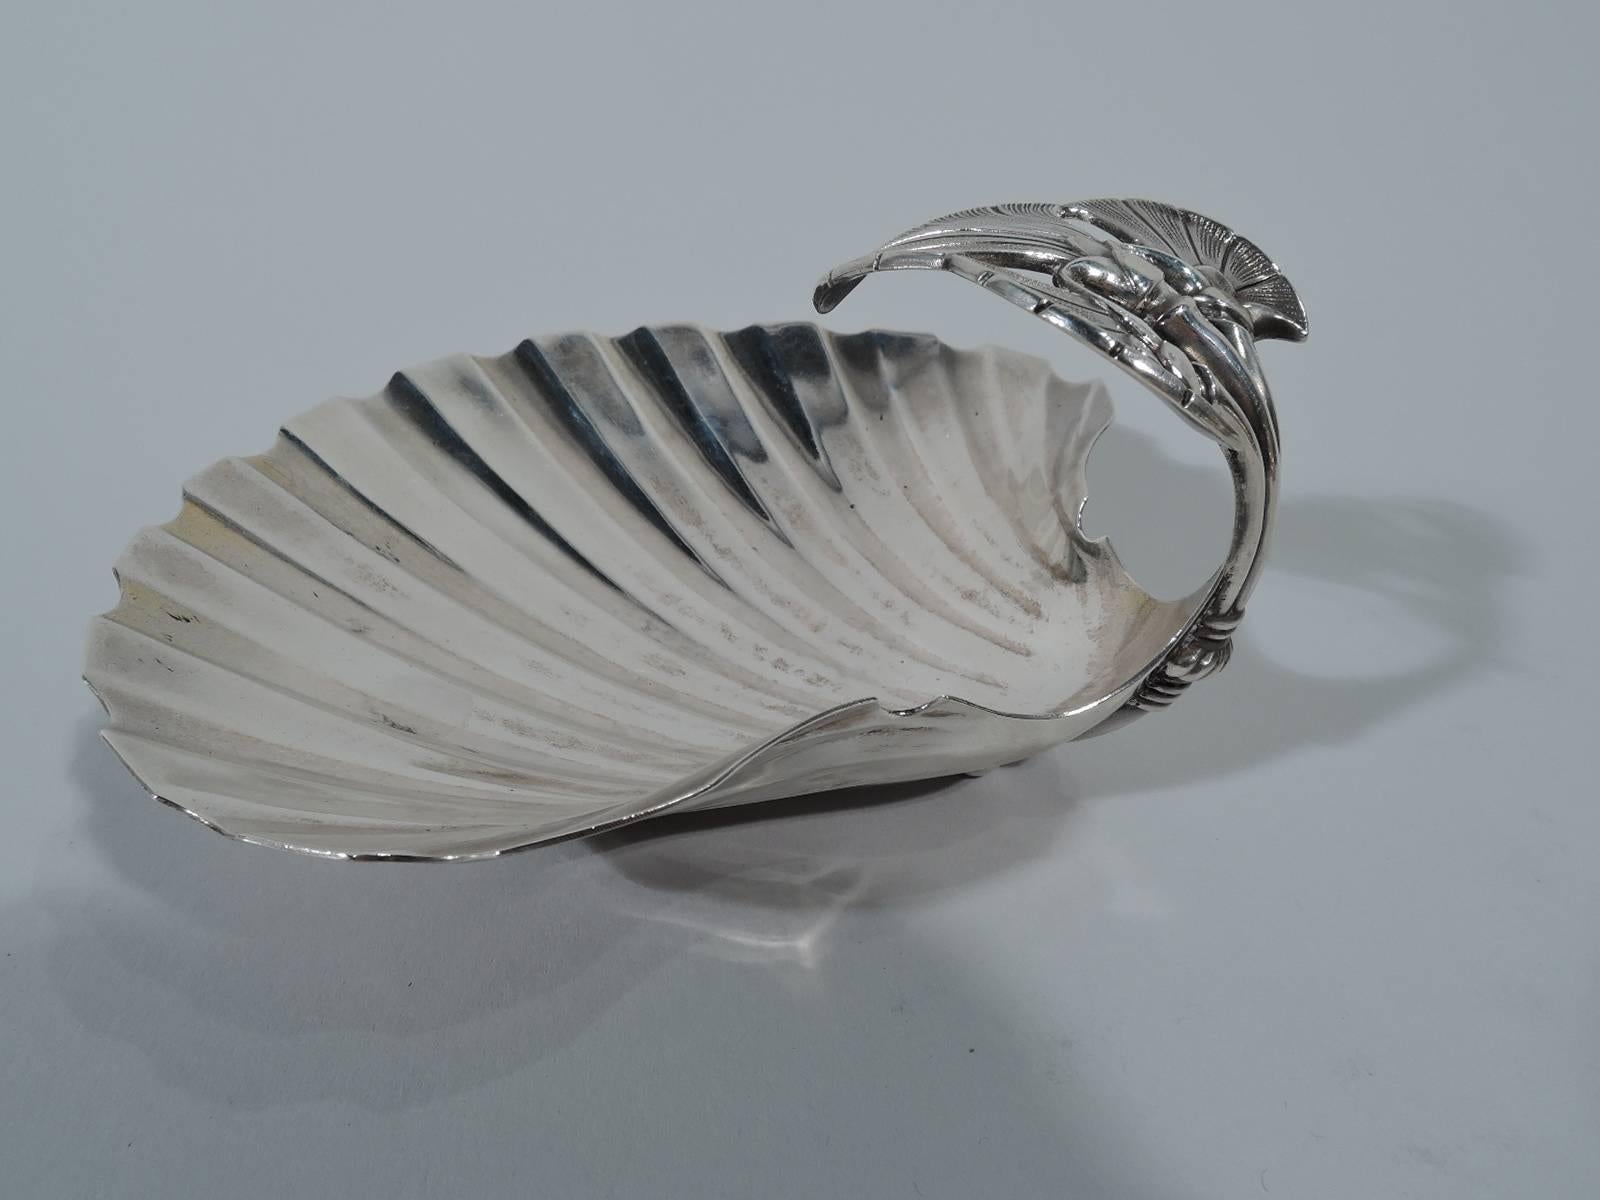 Aesthetic sterling silver scallop shell. Made by Gorham in Providence in 1869. Fluted bowl with stylized and engine-turned leaf handle and two seashell supports. Hallmark includes no. 65 and date letter. Weight: 4.2 troy ounces.